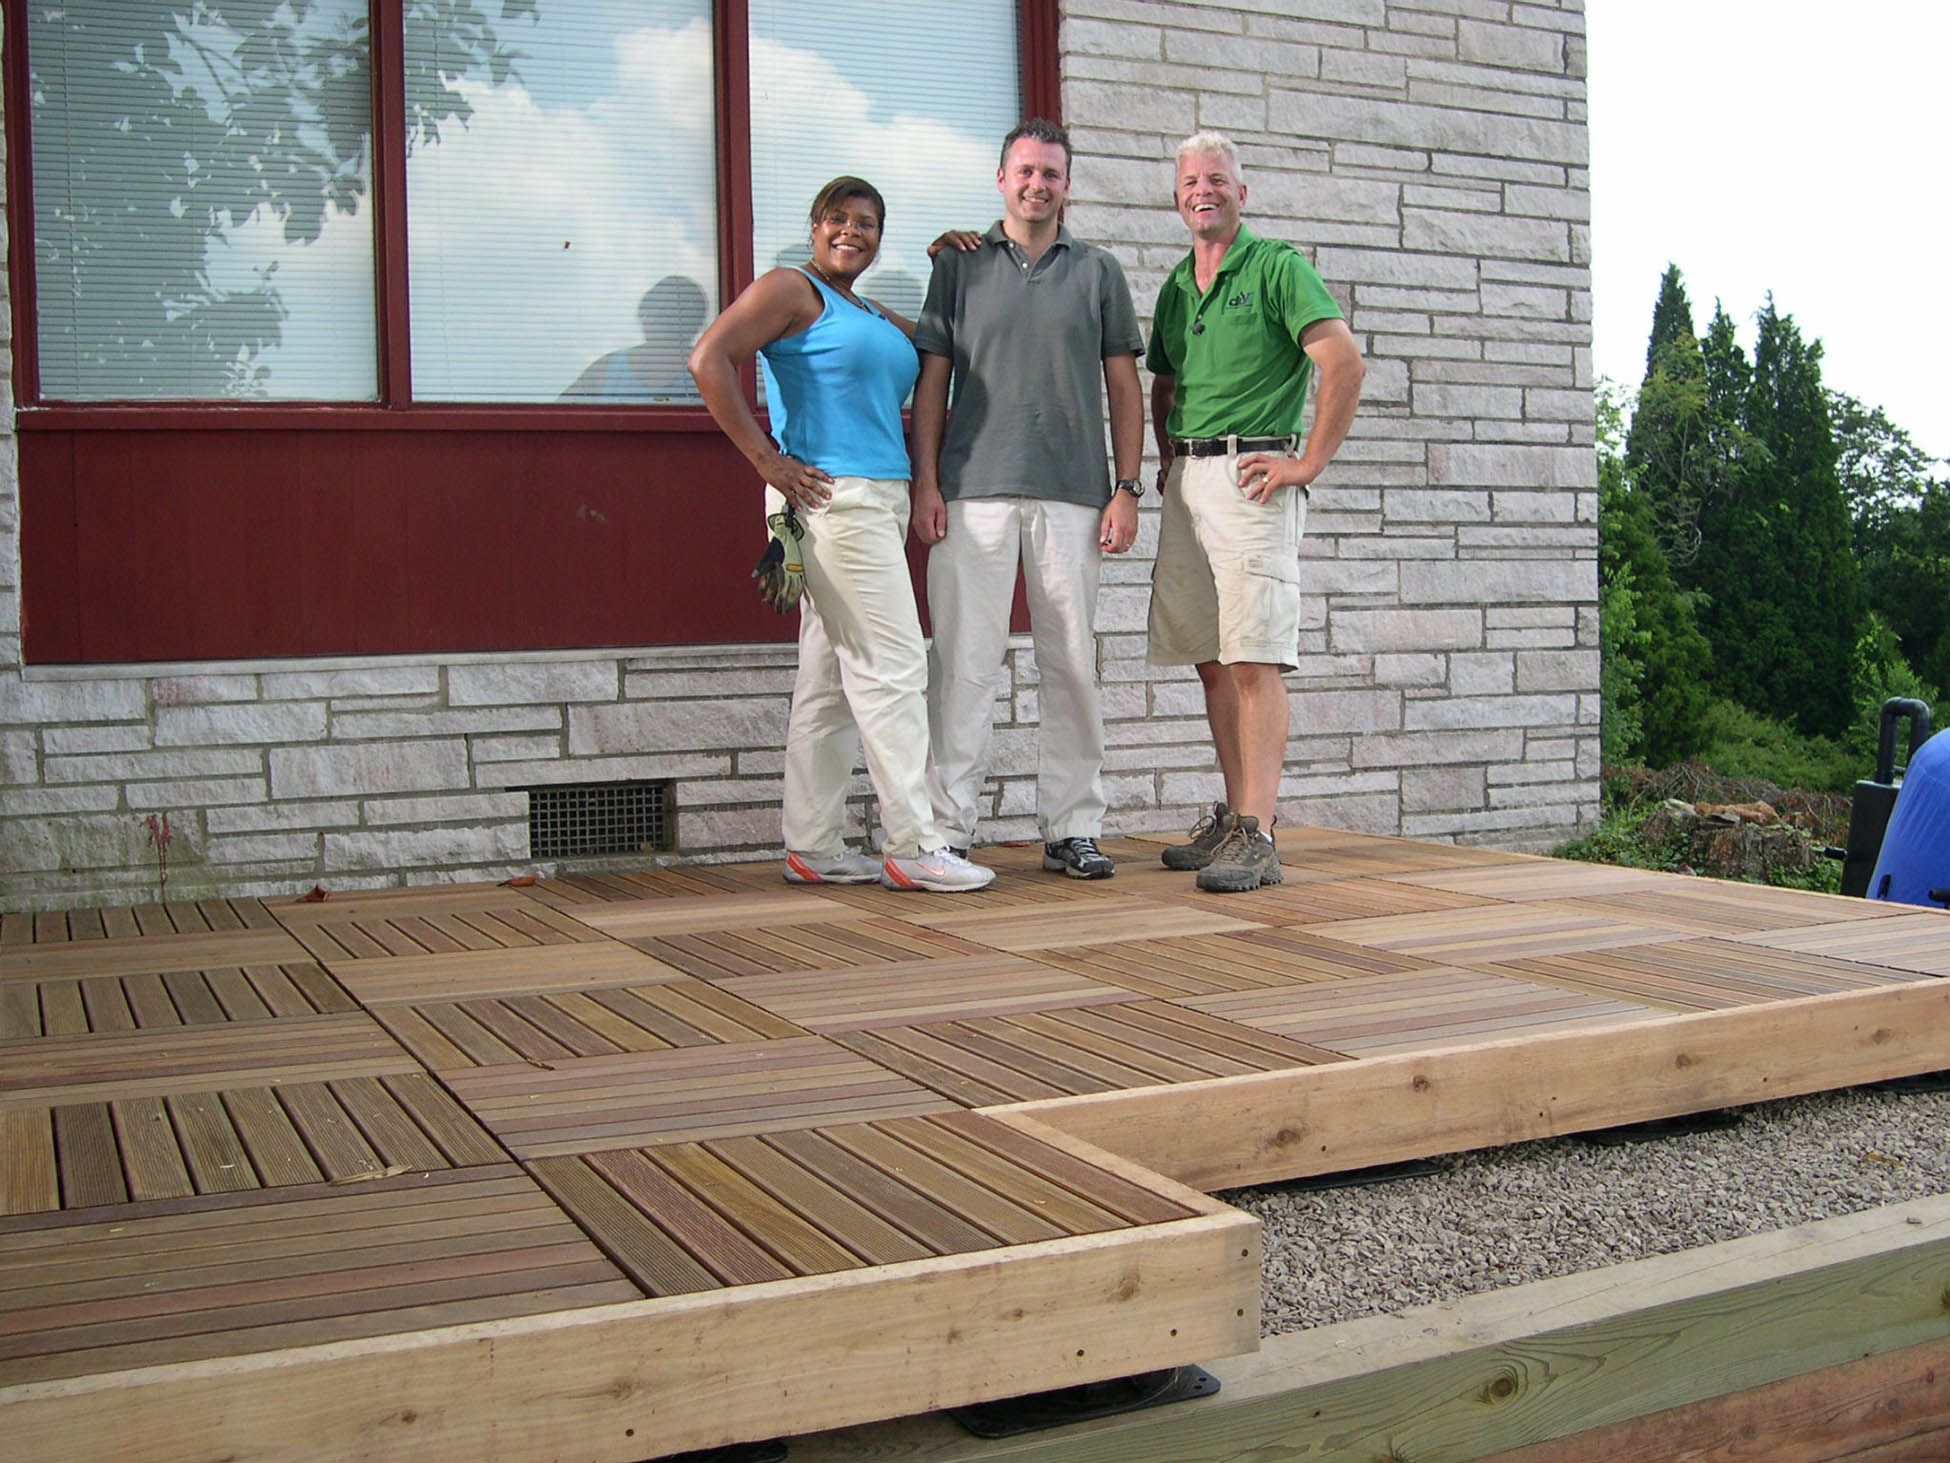 Diy Network Patio Deck Supports Pedestal System Roofdeck Ideas intended for dimensions 1950 X 1463